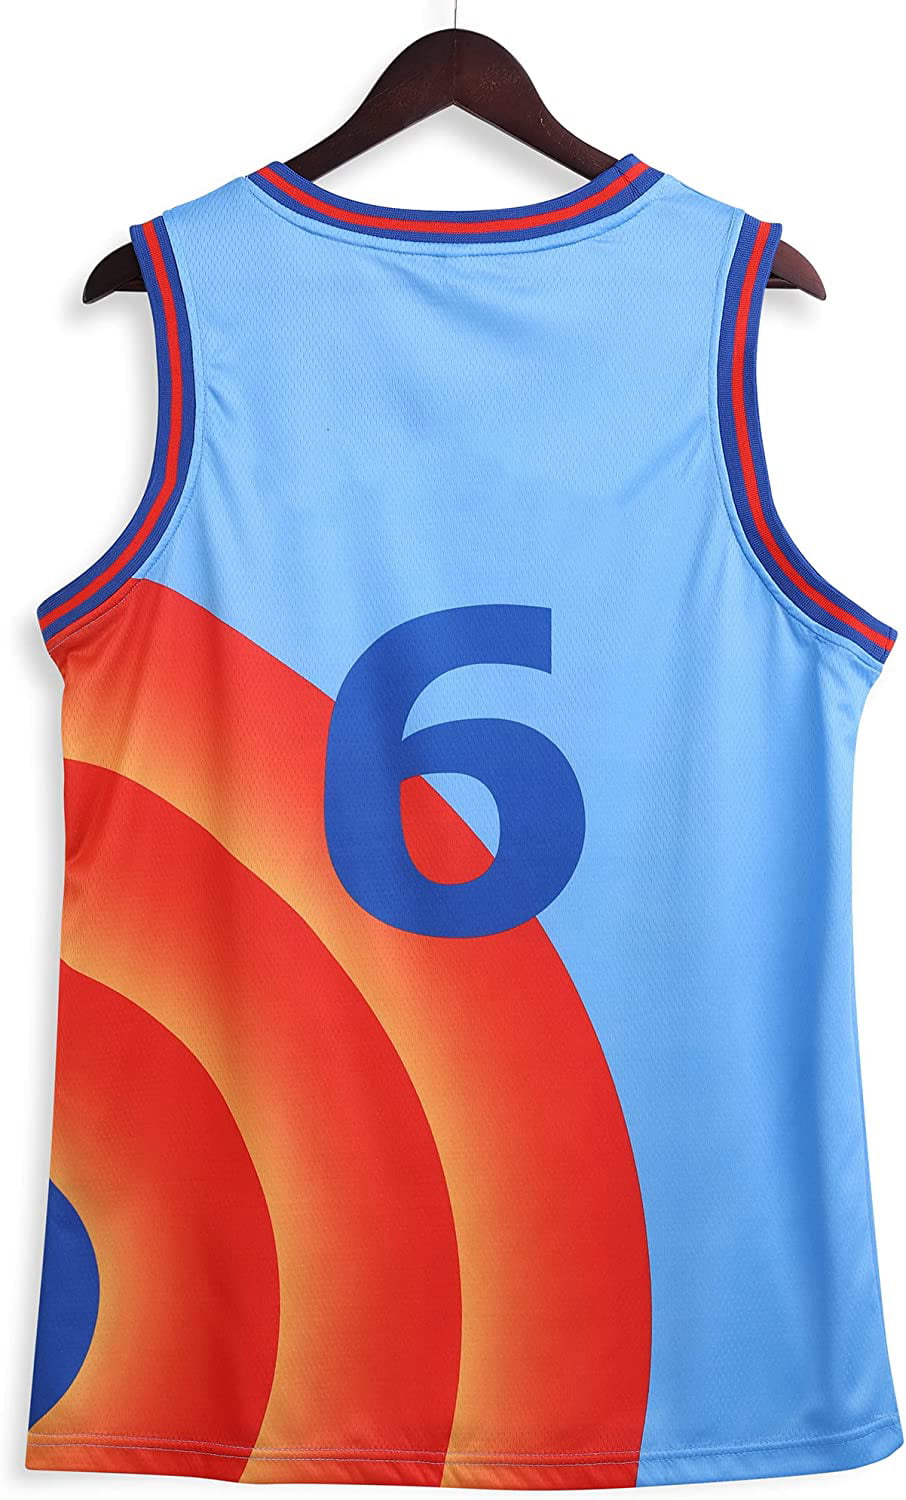 Chlororixia Basketball Sports Fan Jersey for Men : 90s Outfit Shirt Clothes  for Men,Sports Jersey 23#.